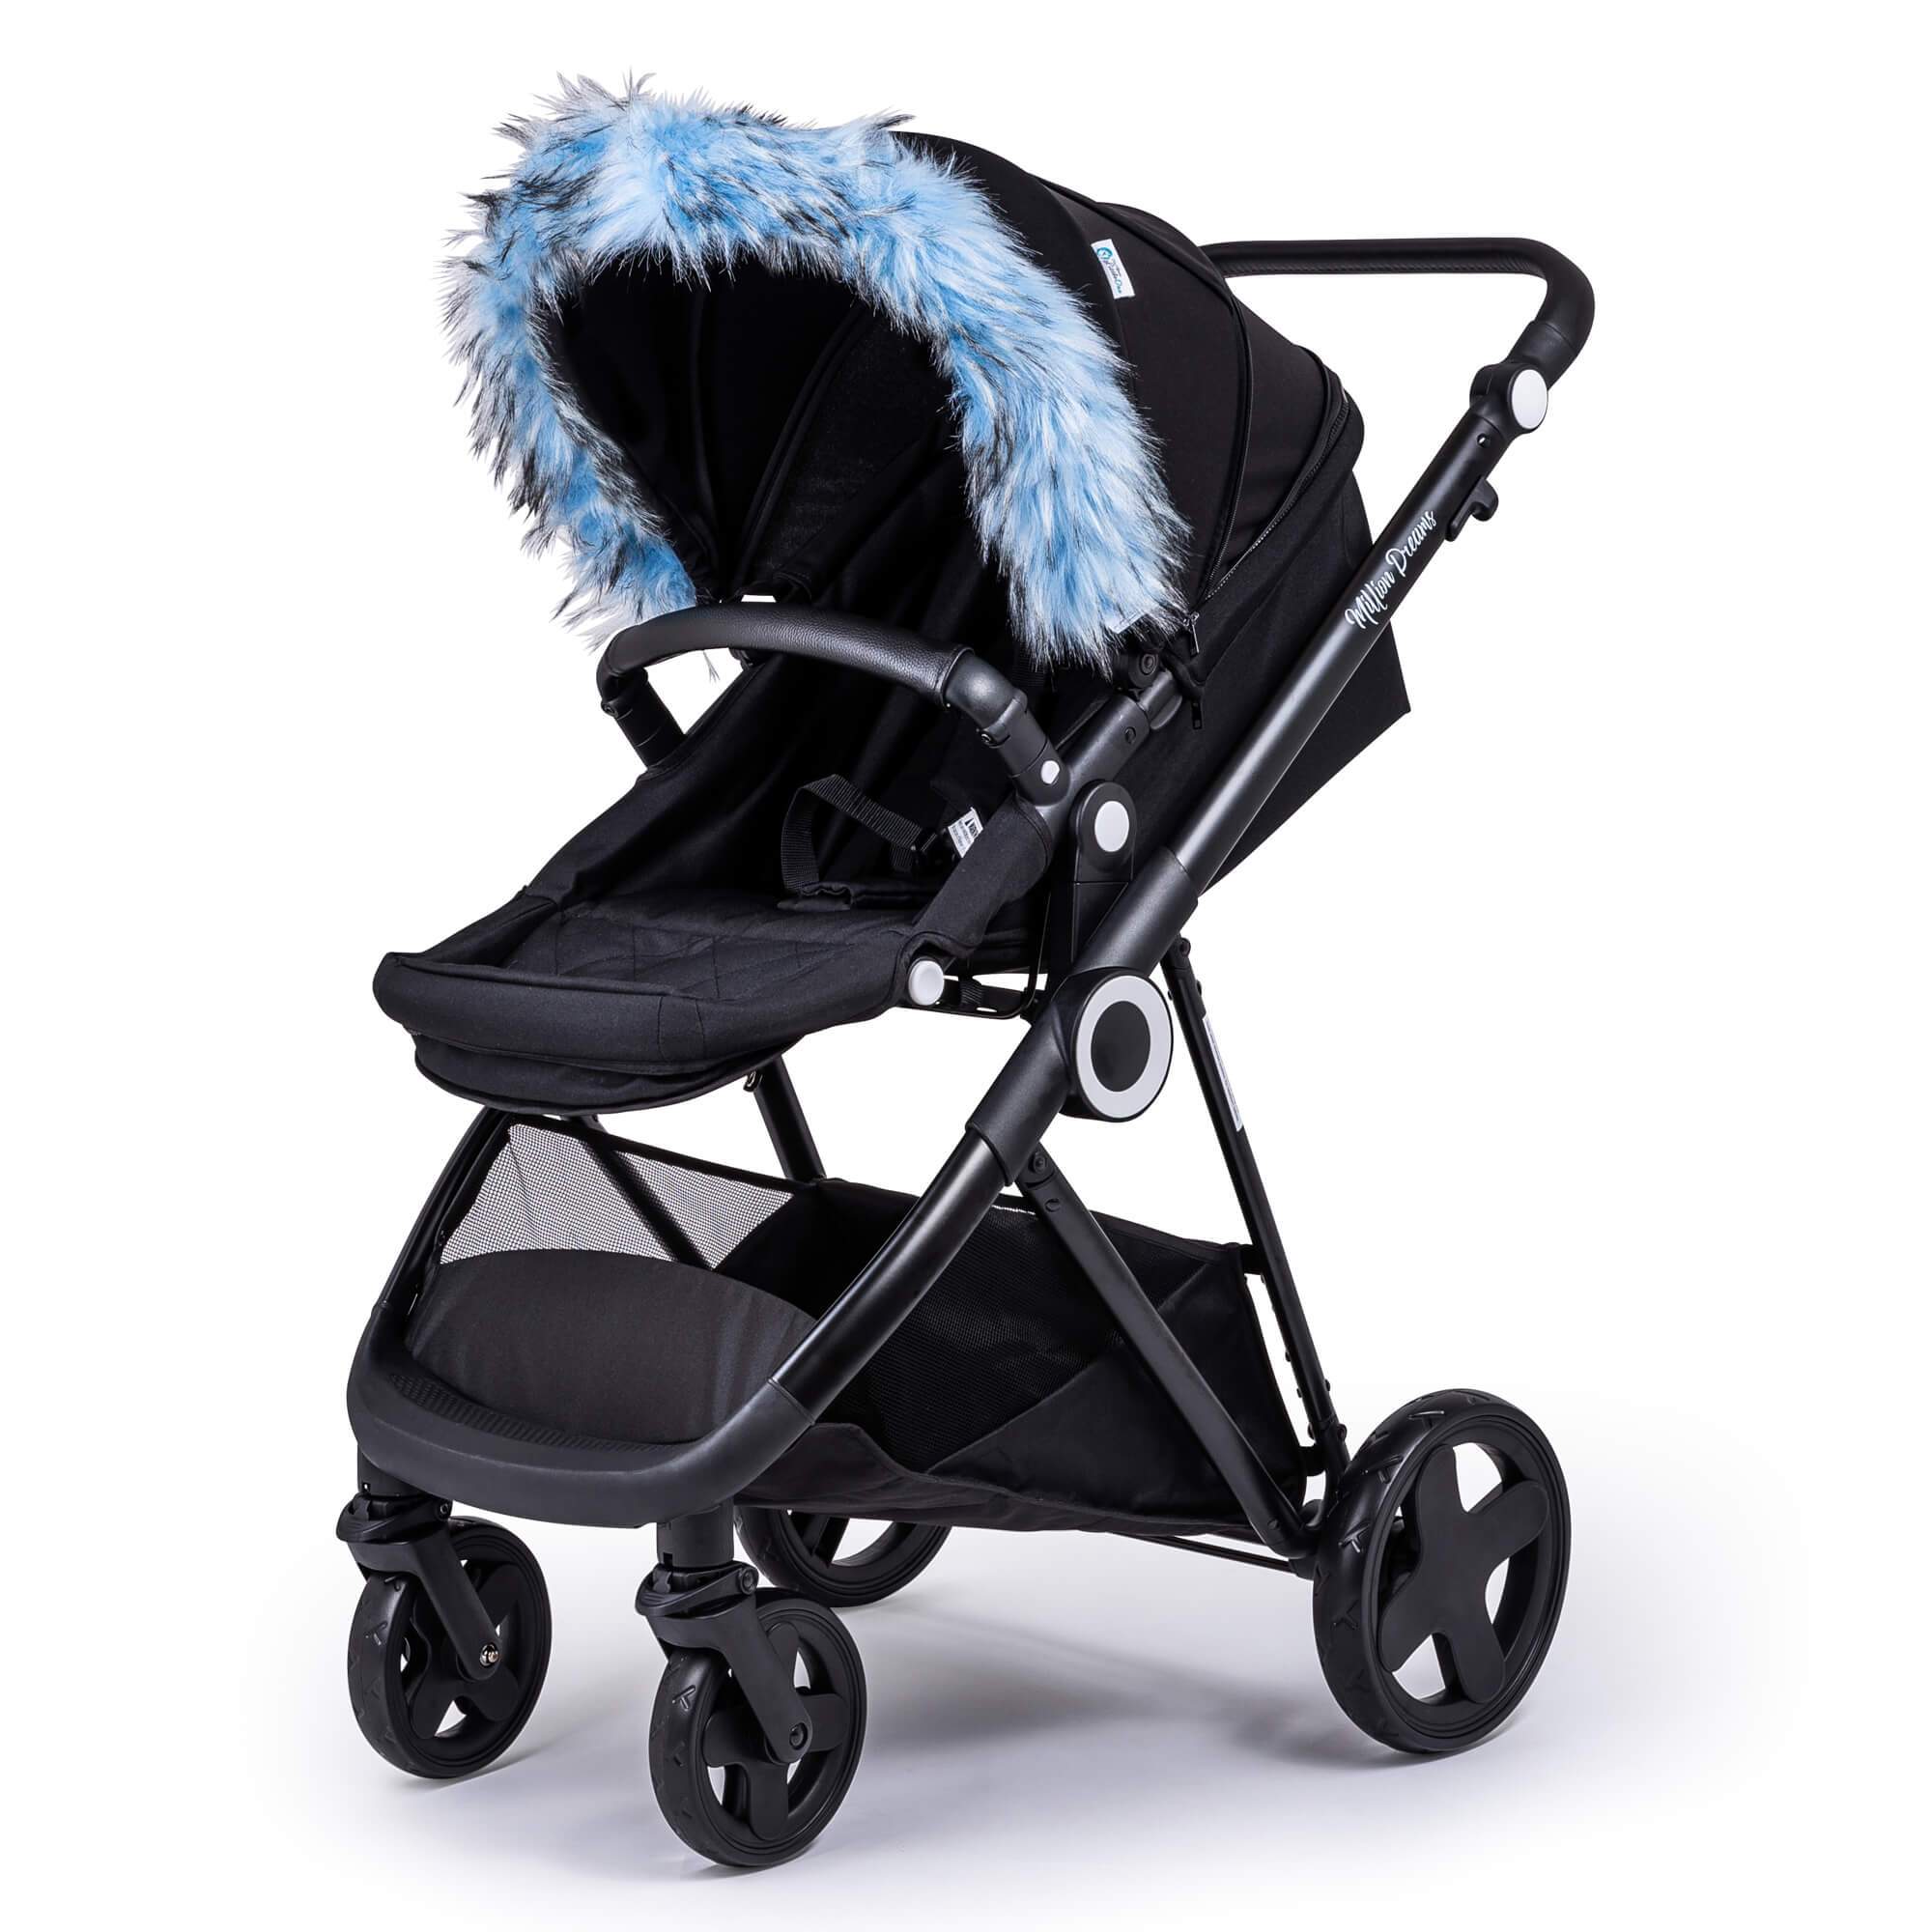 Pram Fur Hood Trim Attachment for Pushchair Compatible with Joolz - Light Blue / Fits All Models | For Your Little One